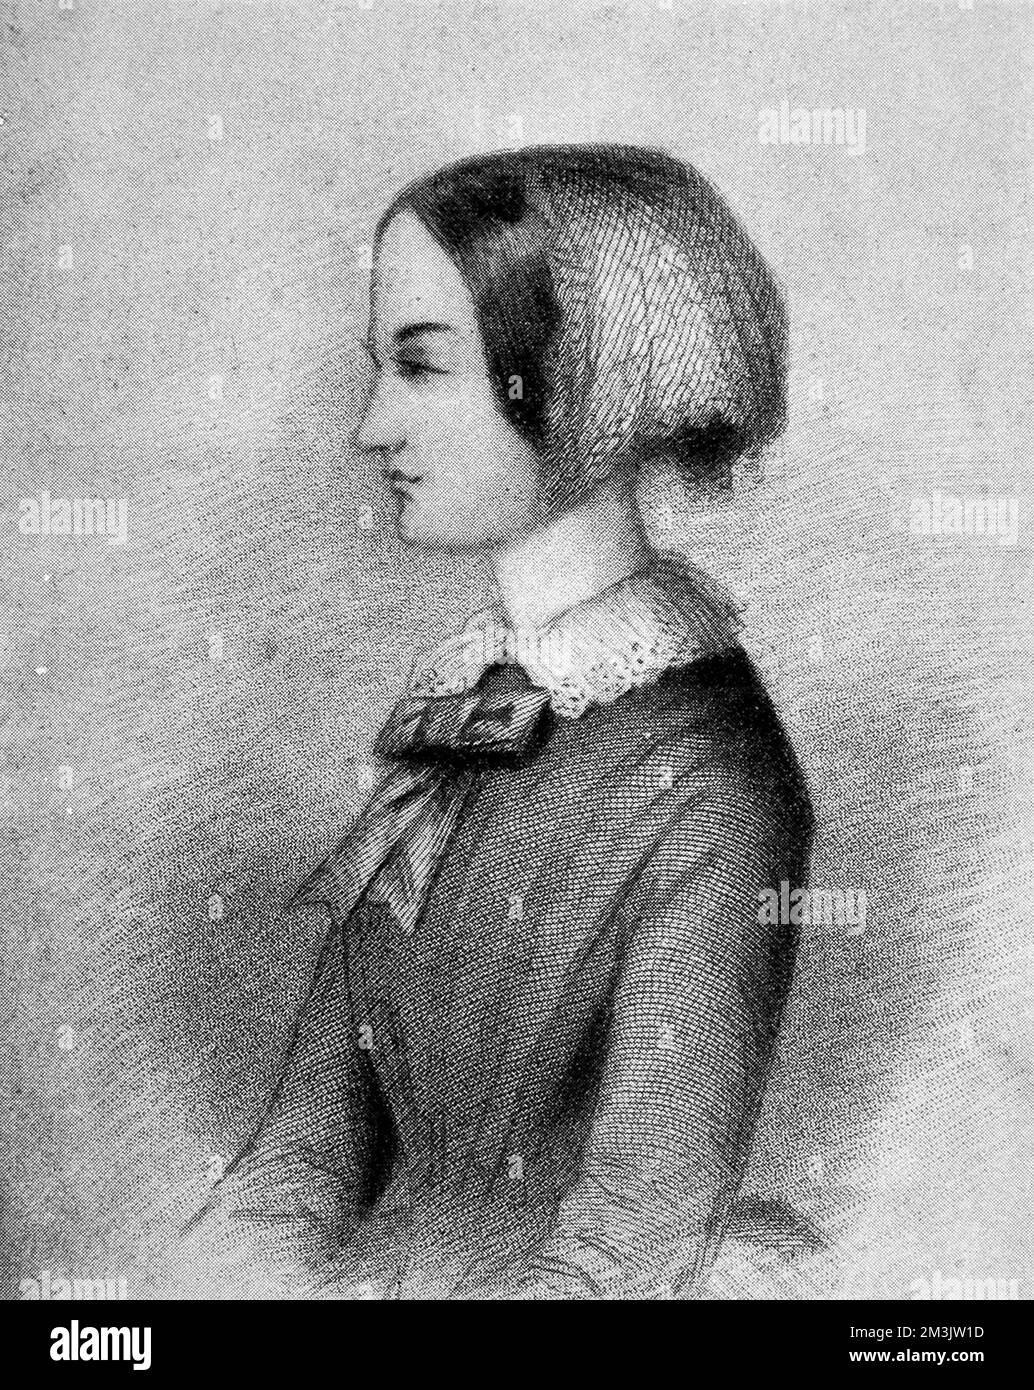 Florence Nightingale (1820 - 1910) was born in Italy. She moved to England with her wealthy family and was educated at home by her father. Although it was not deemed suitable for ladies of Florence's social standing to become nurses, she believed that it was God's chosen path for her. She trained in Kaiserswerth, near Dusseldorf and then returned to England to take a post at a Harley Street surgery.   She was sent along with 38 nurses to the Barrack Hospital in Scutari to assist with medical support. As she cared for the troops she gained much repect, writing letters home on the soldiers' b Stock Photo